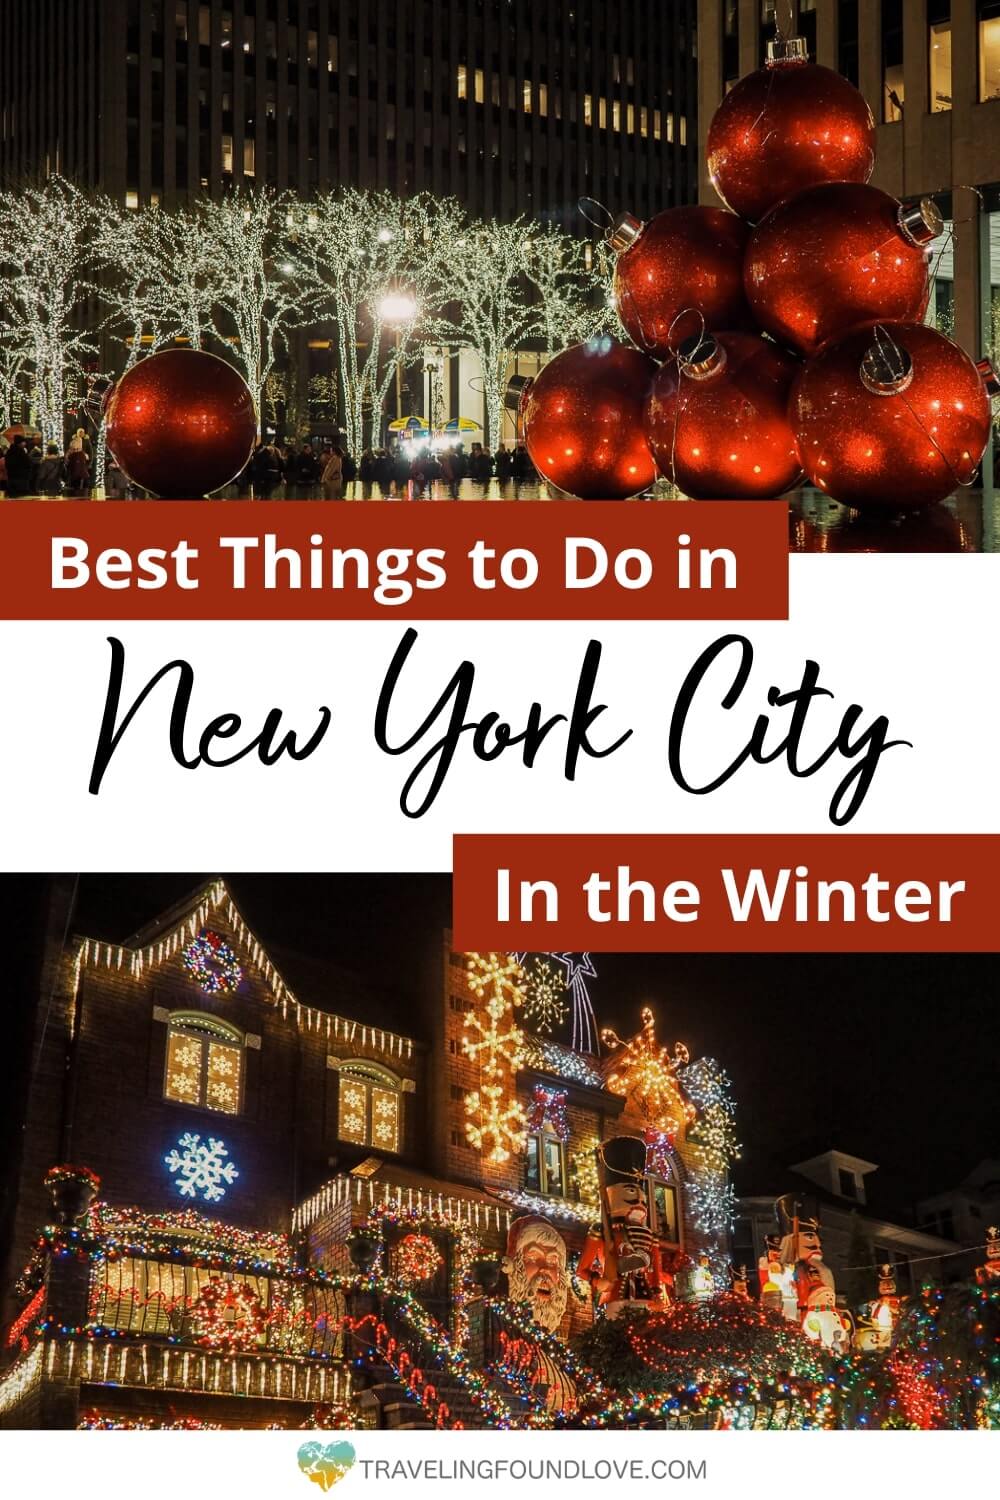 Best Things to do in New York City in winter - Pinterest Pin